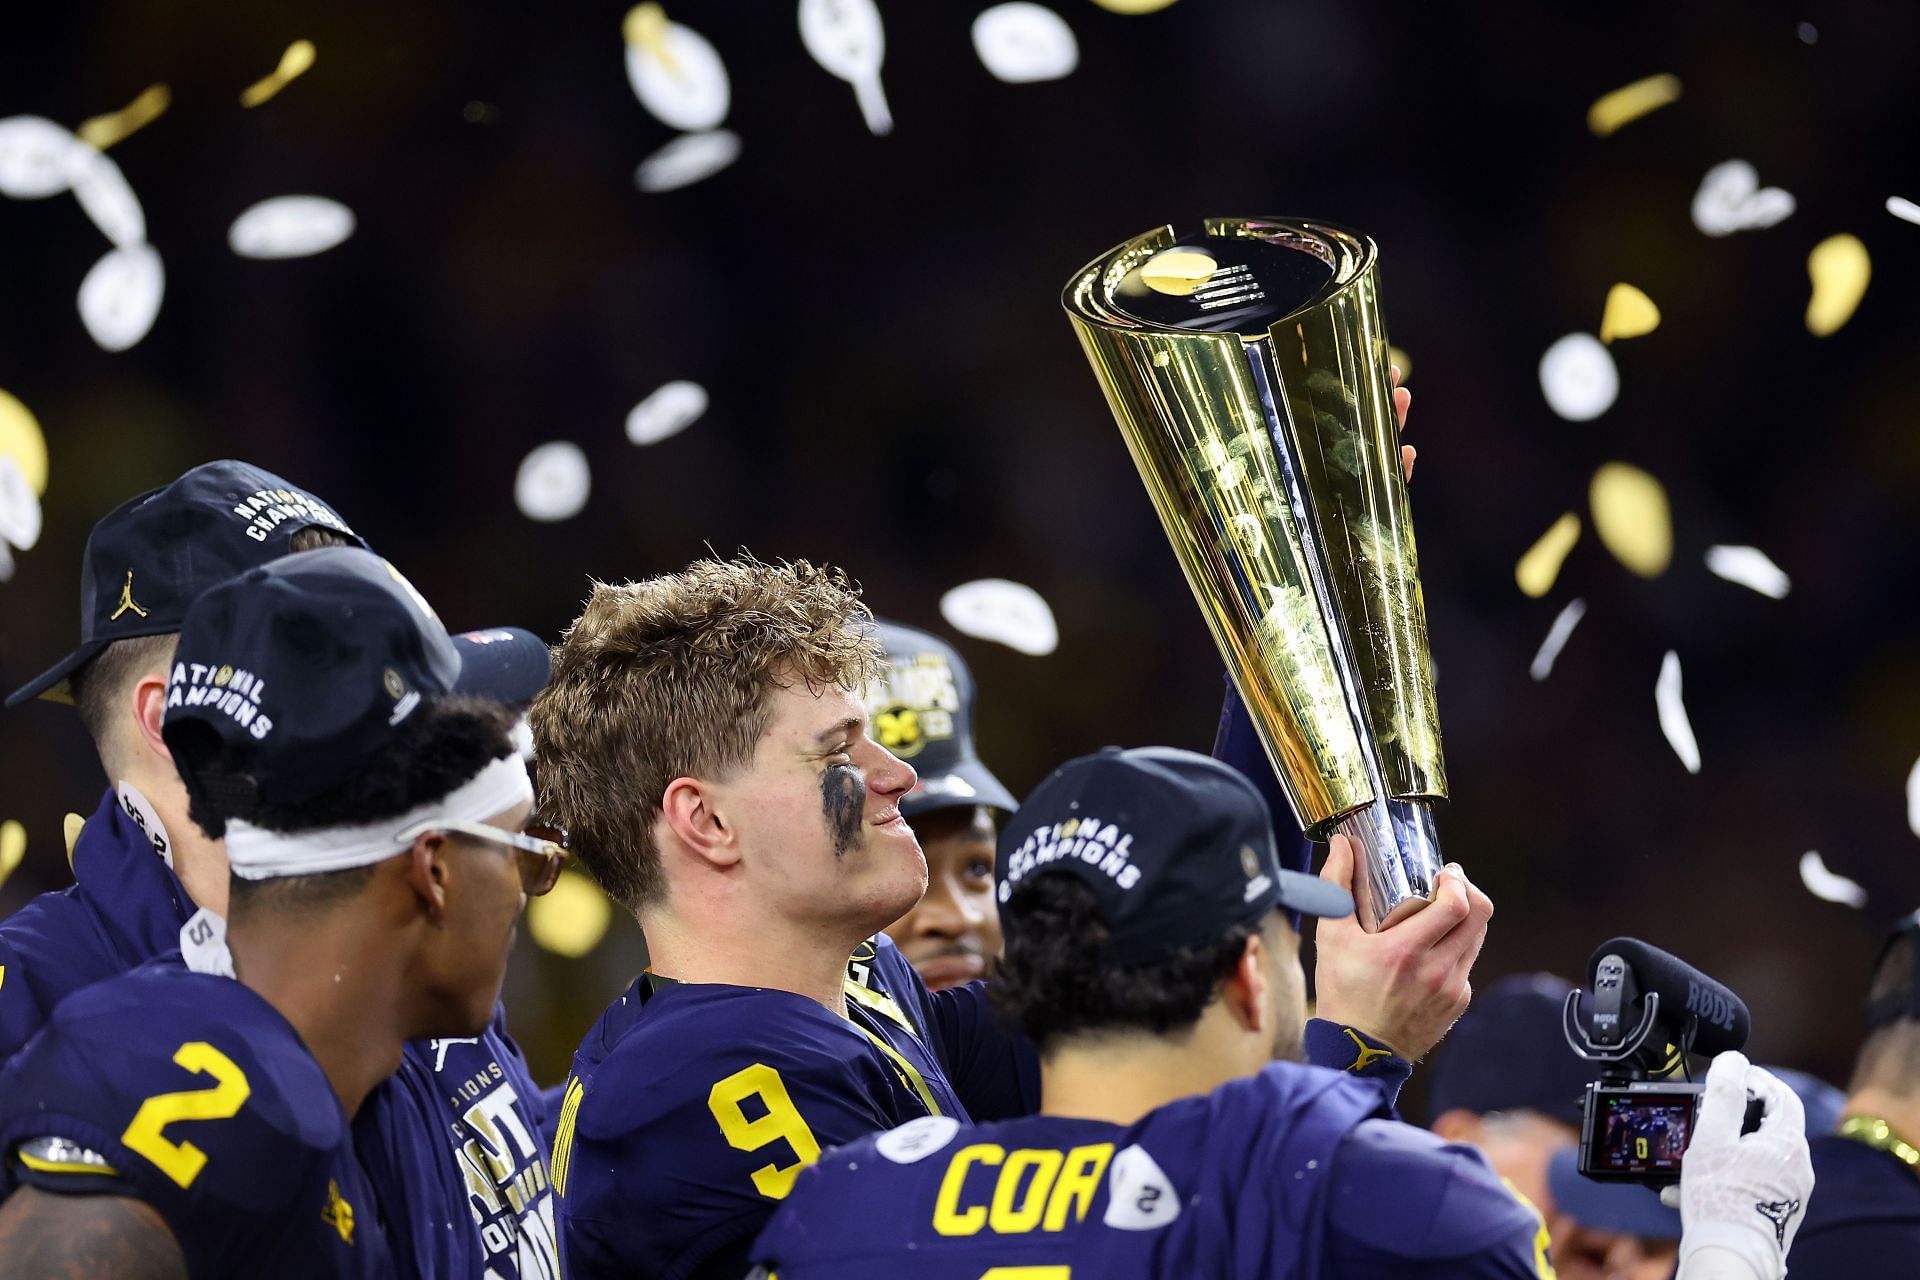 Will Michigan have to vacate wins after National Championship win